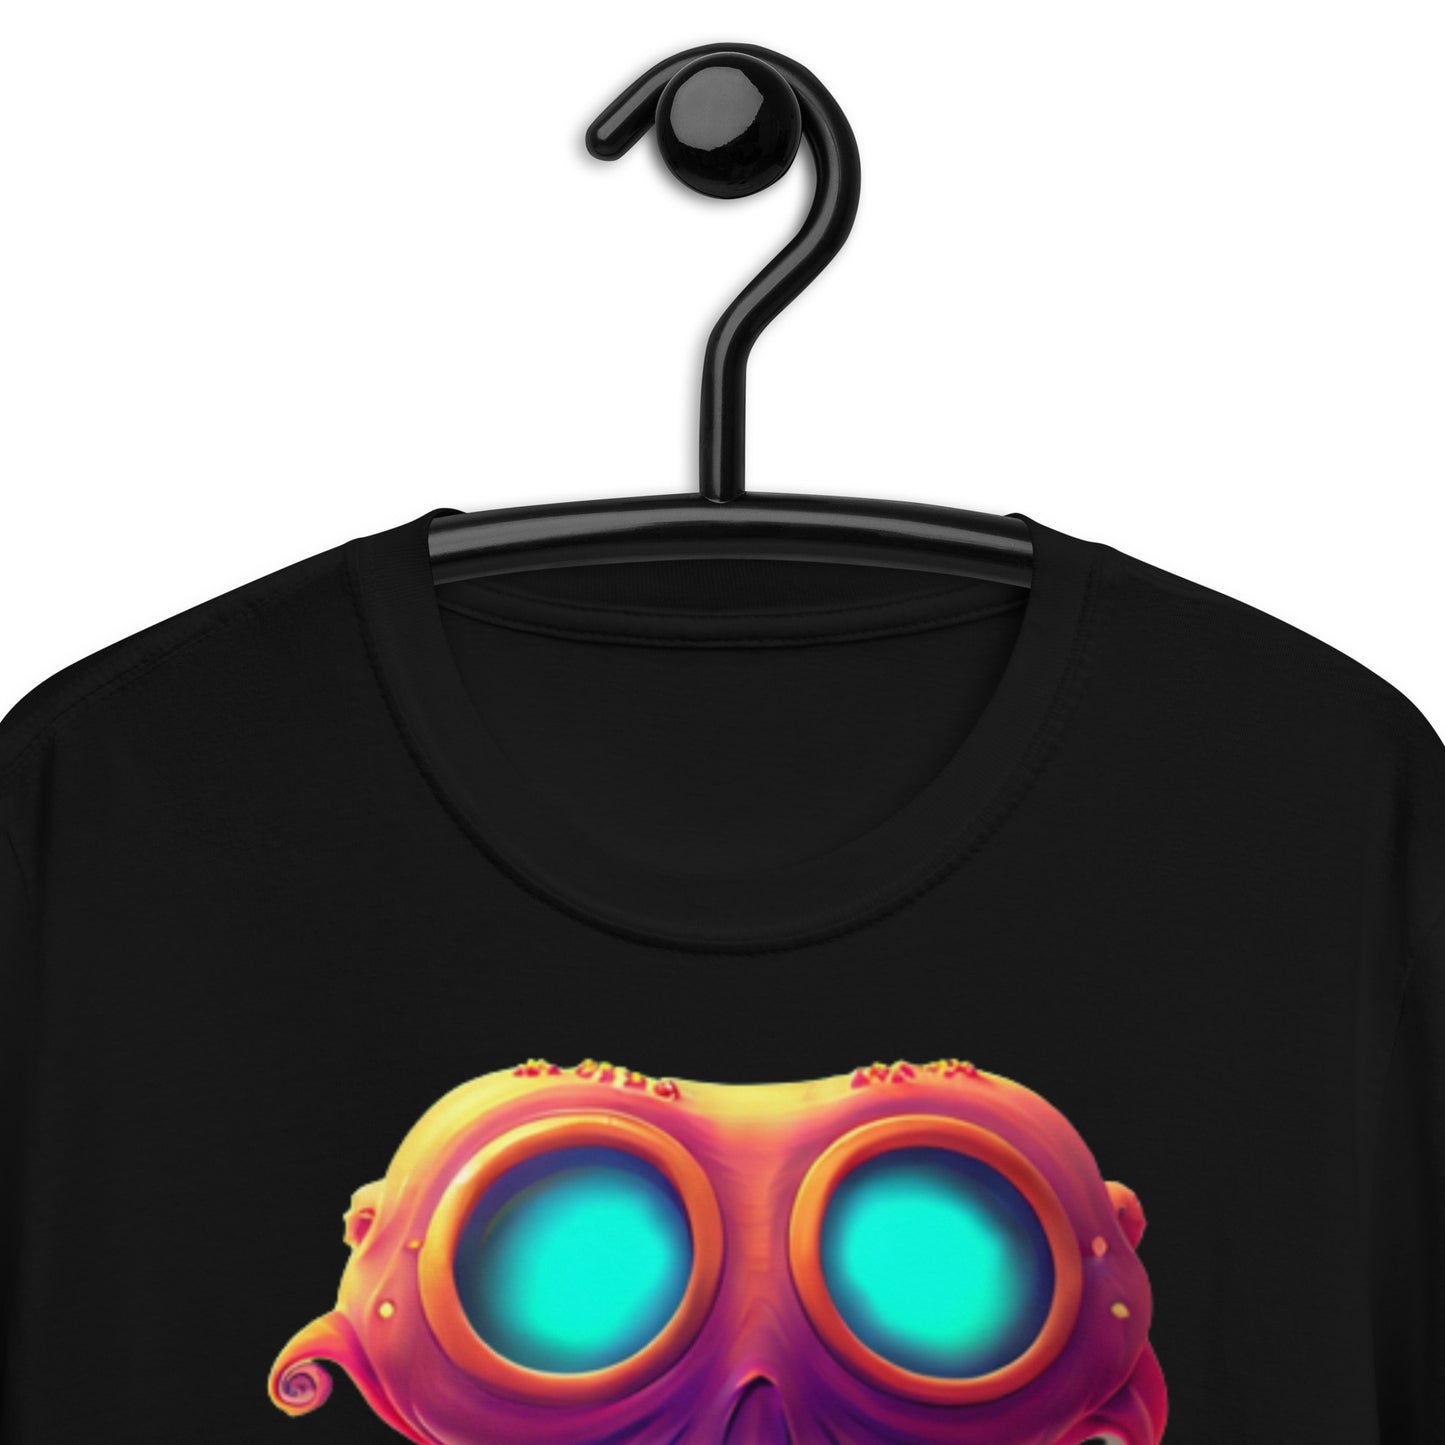 Psychedelic Octopus - Unisex T-Shirt, Ecstasy Edition